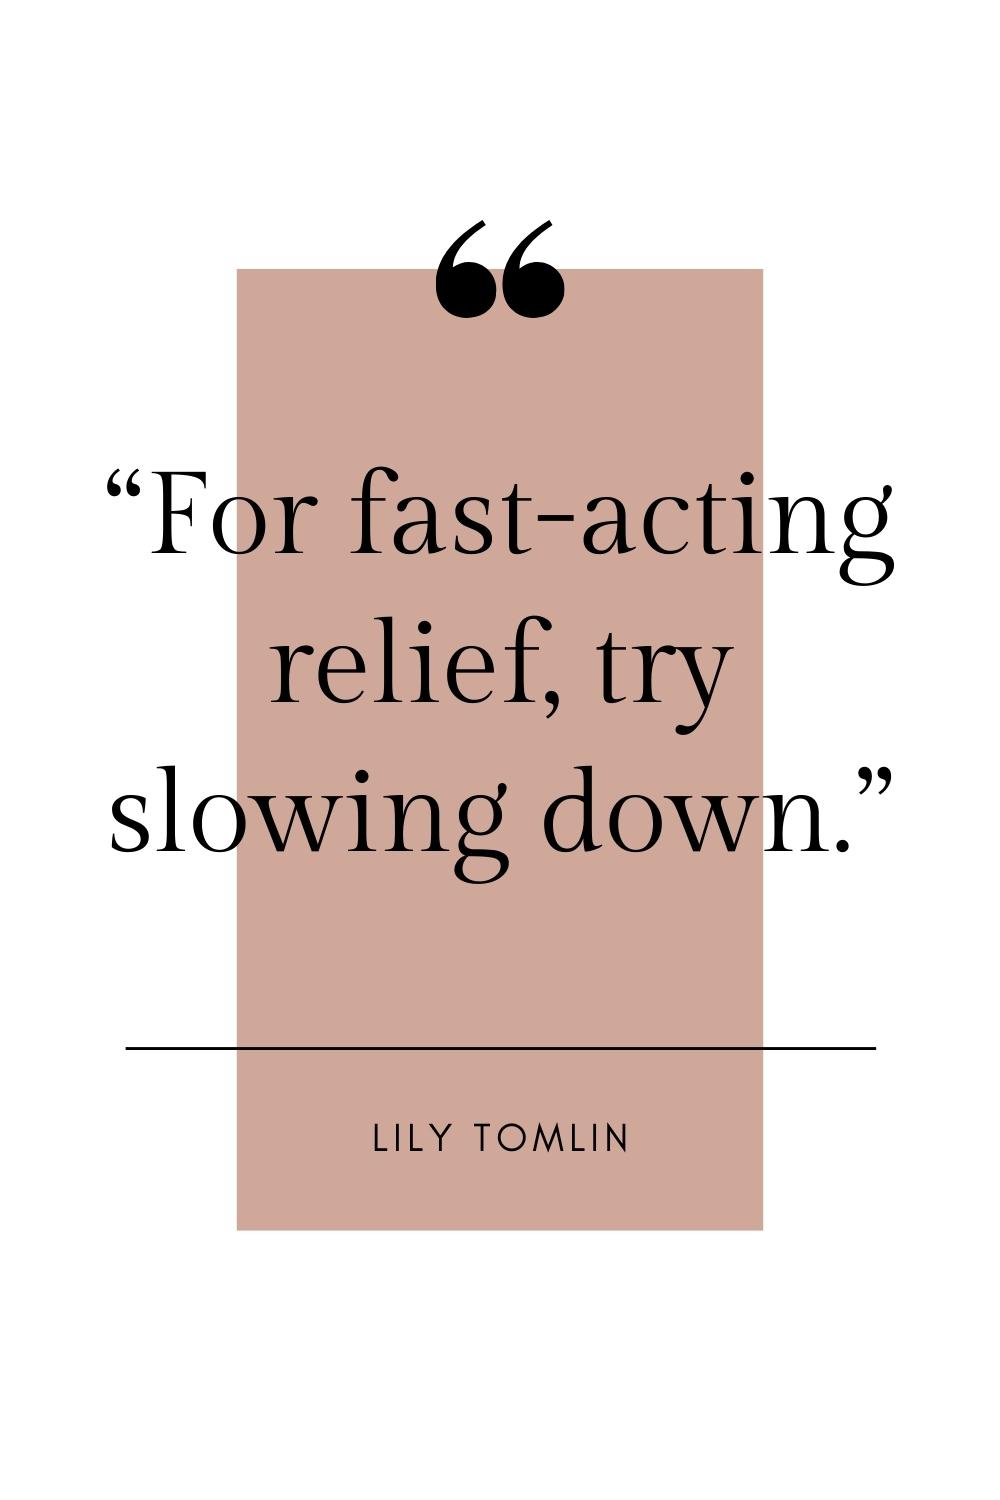 lily tomlin quote